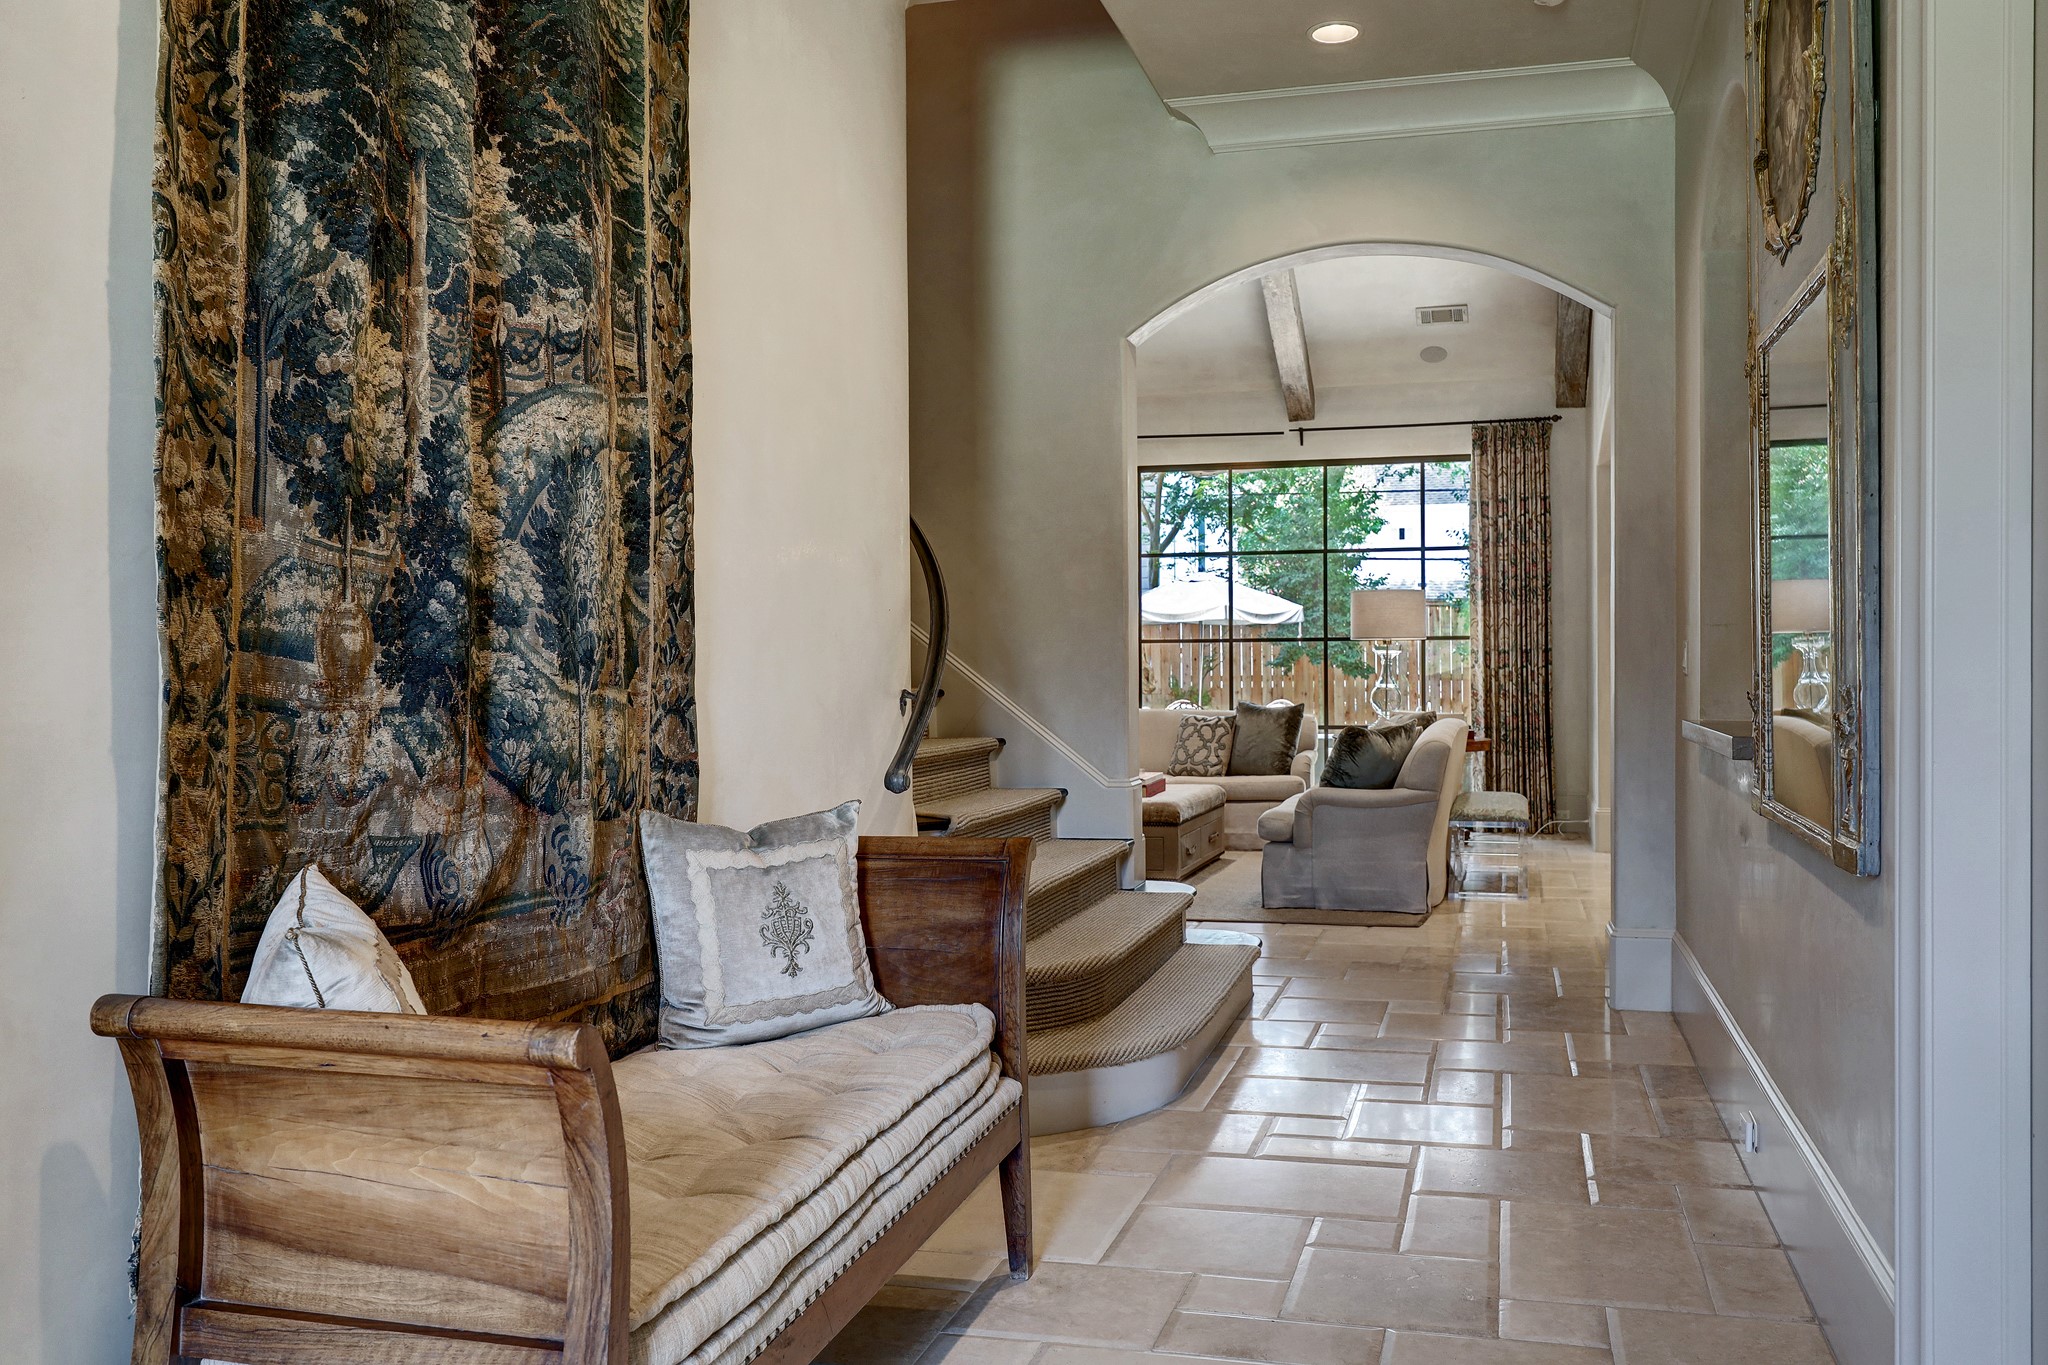 The luxurious pillow-edge travertine floors and stunning Segreto plaster walls promise a home filled with elegance, history, and unparalleled design.